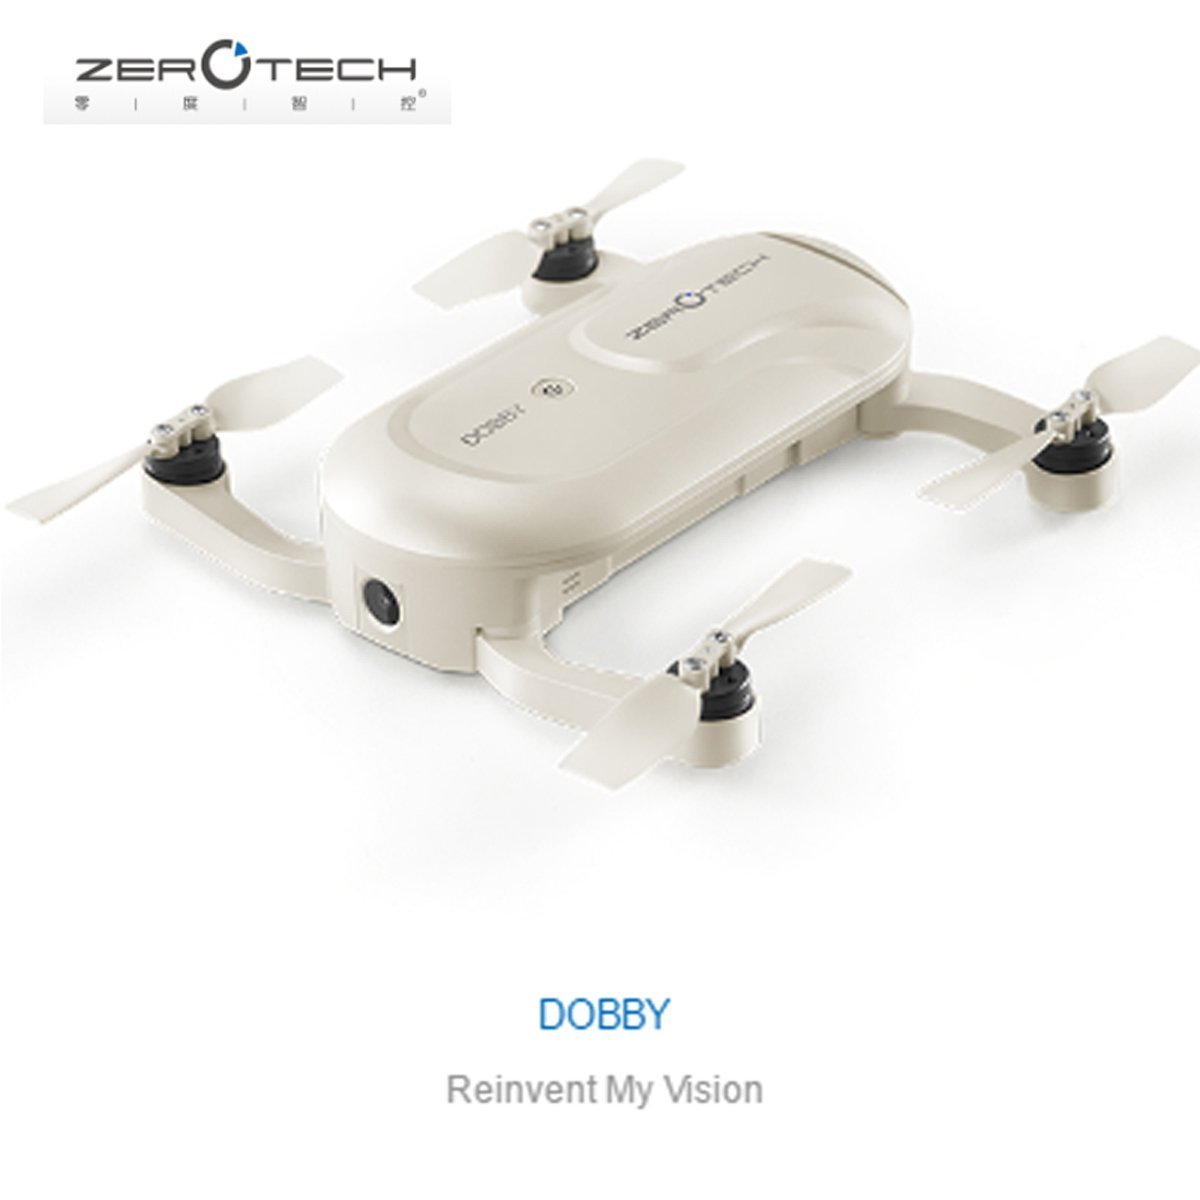 ZEROTECH Dobby Pocket Selfie Drone FPV With HD Camera - Bundle with Fr